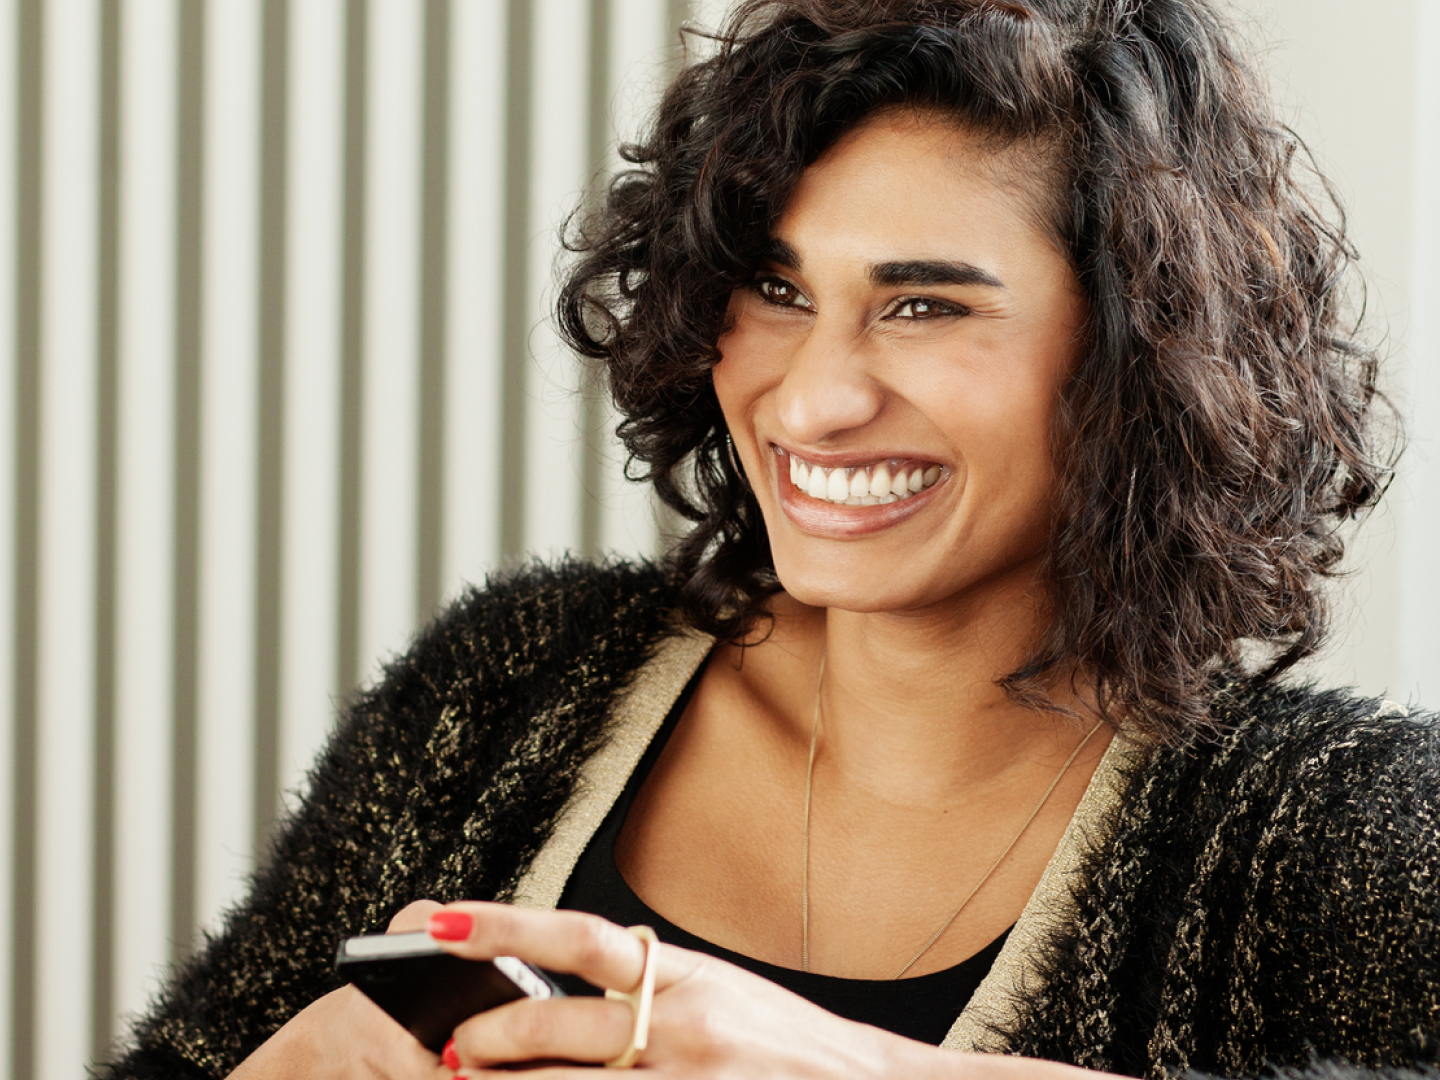 woman smiling holding phone